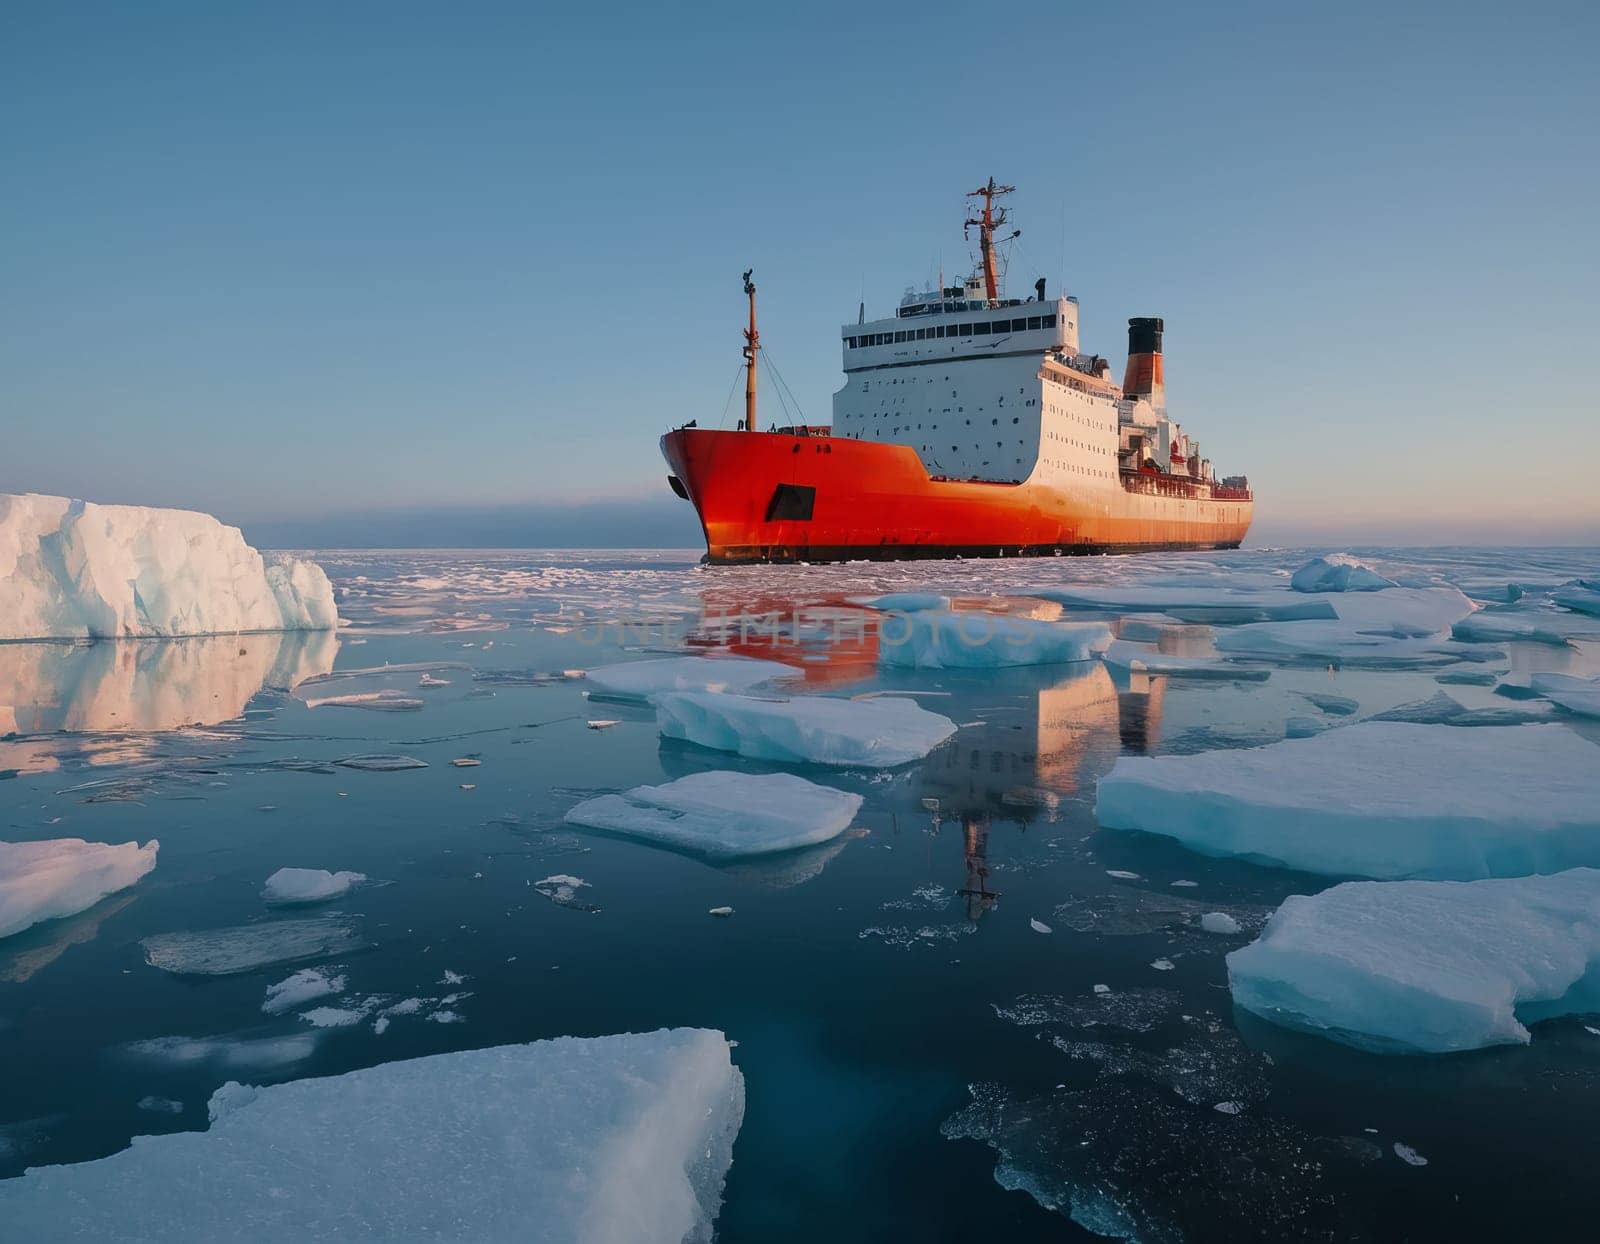 Large orange and white ship navigating through the Arctic Ocean, surrounded by icebergs under a clear blue sky